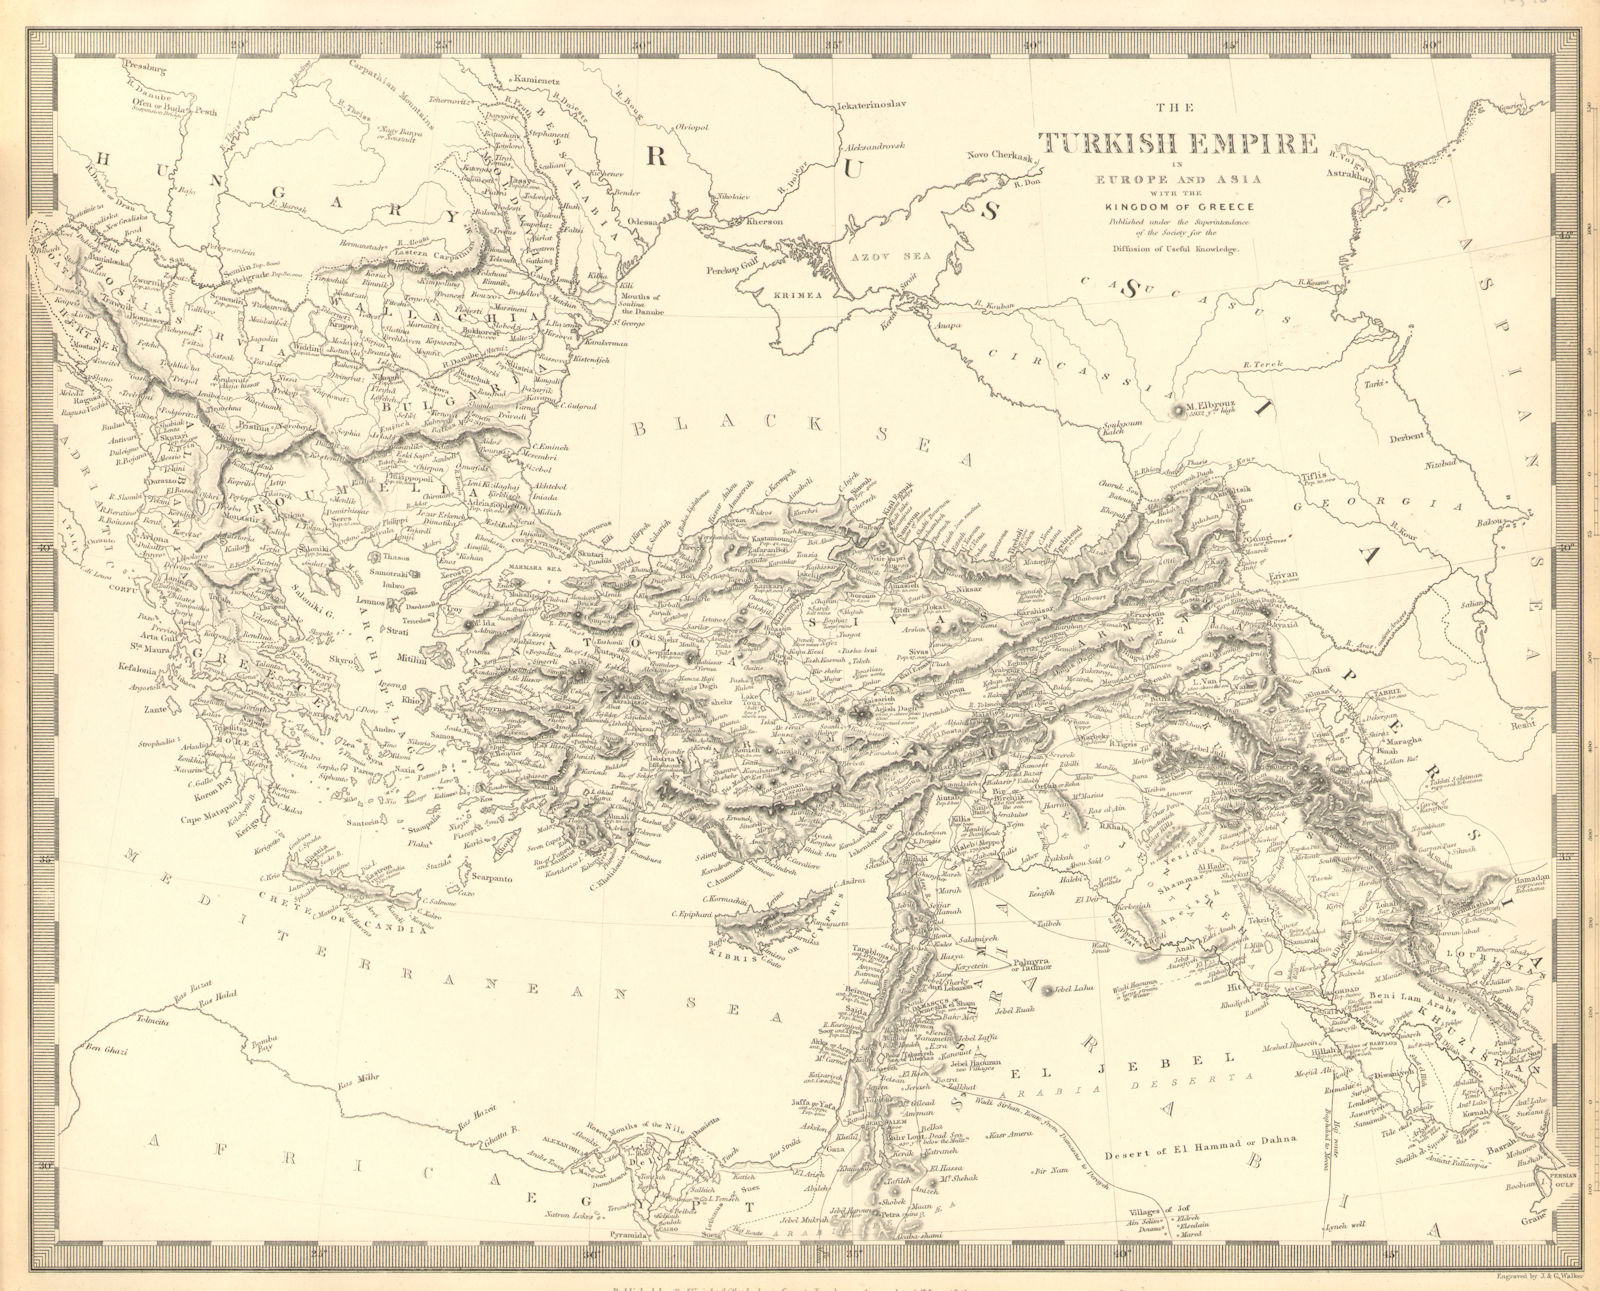 Associate Product OTTOMAN EMPIRE. in Europe and Asia with the Kingdom of Greece. SDUK 1848 map